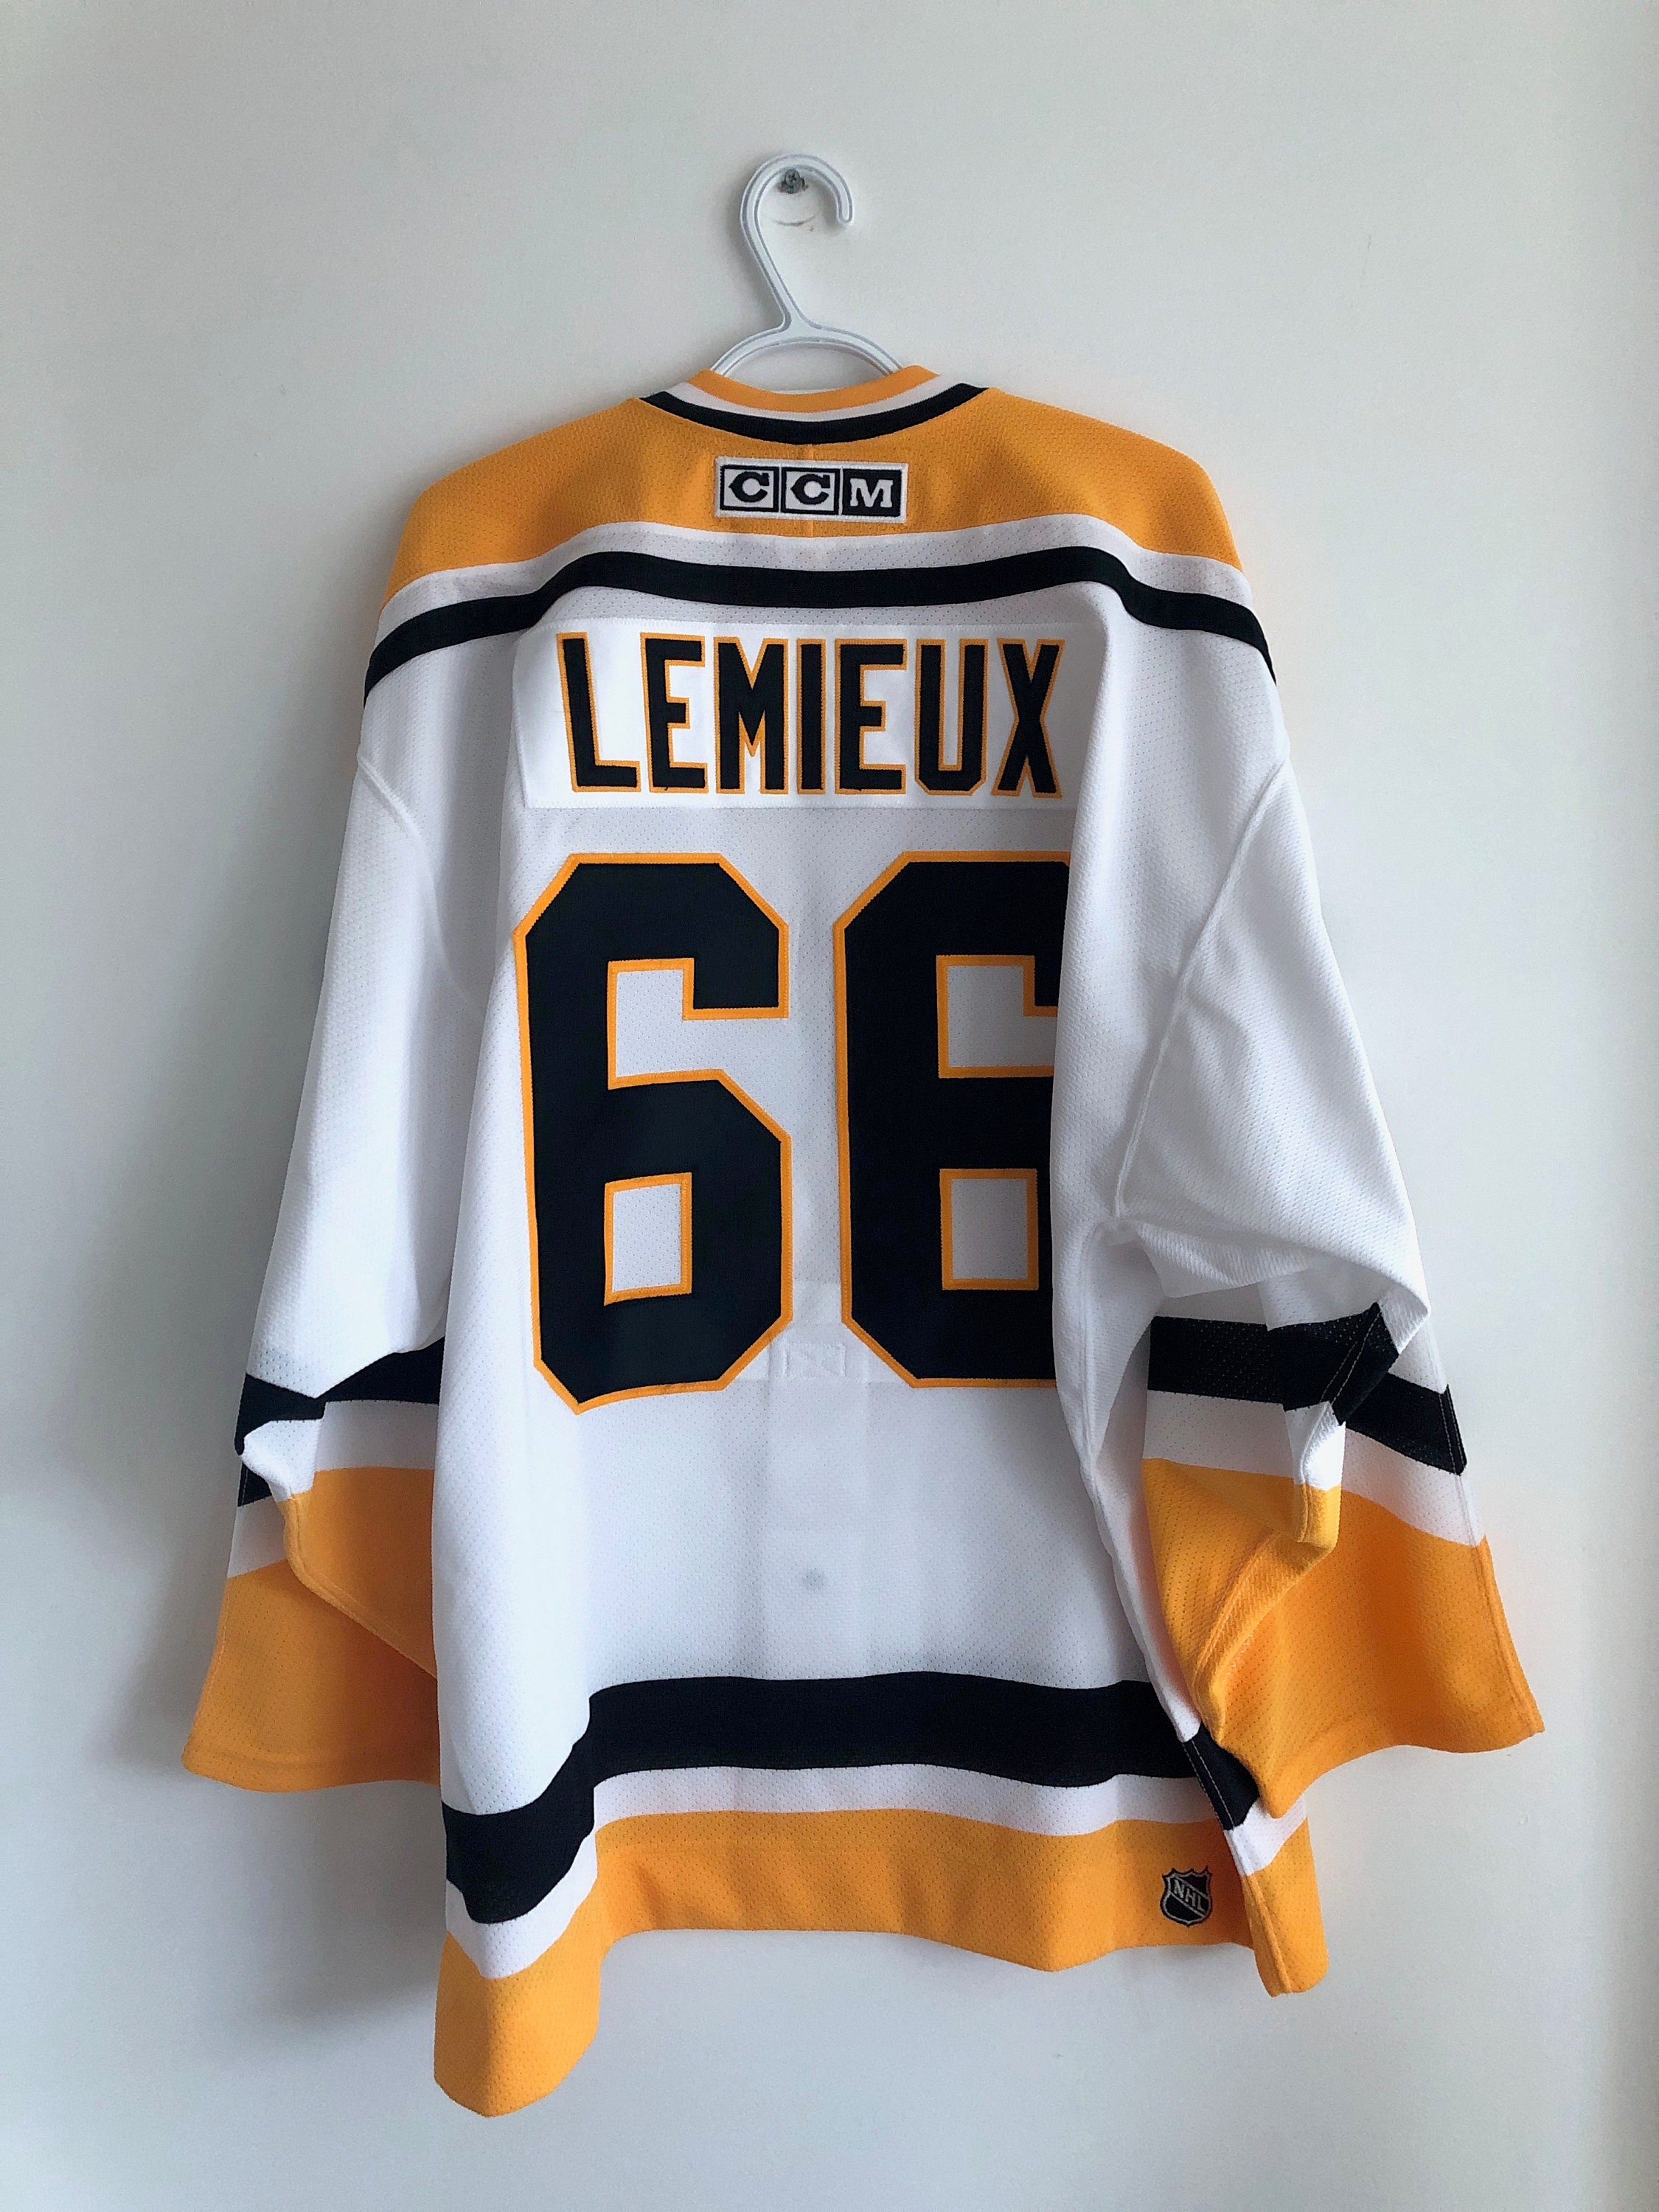 MARIO LEMIEUX Signed Pittsburgh Penguins Hockey Jersey Autographed CCM  Small